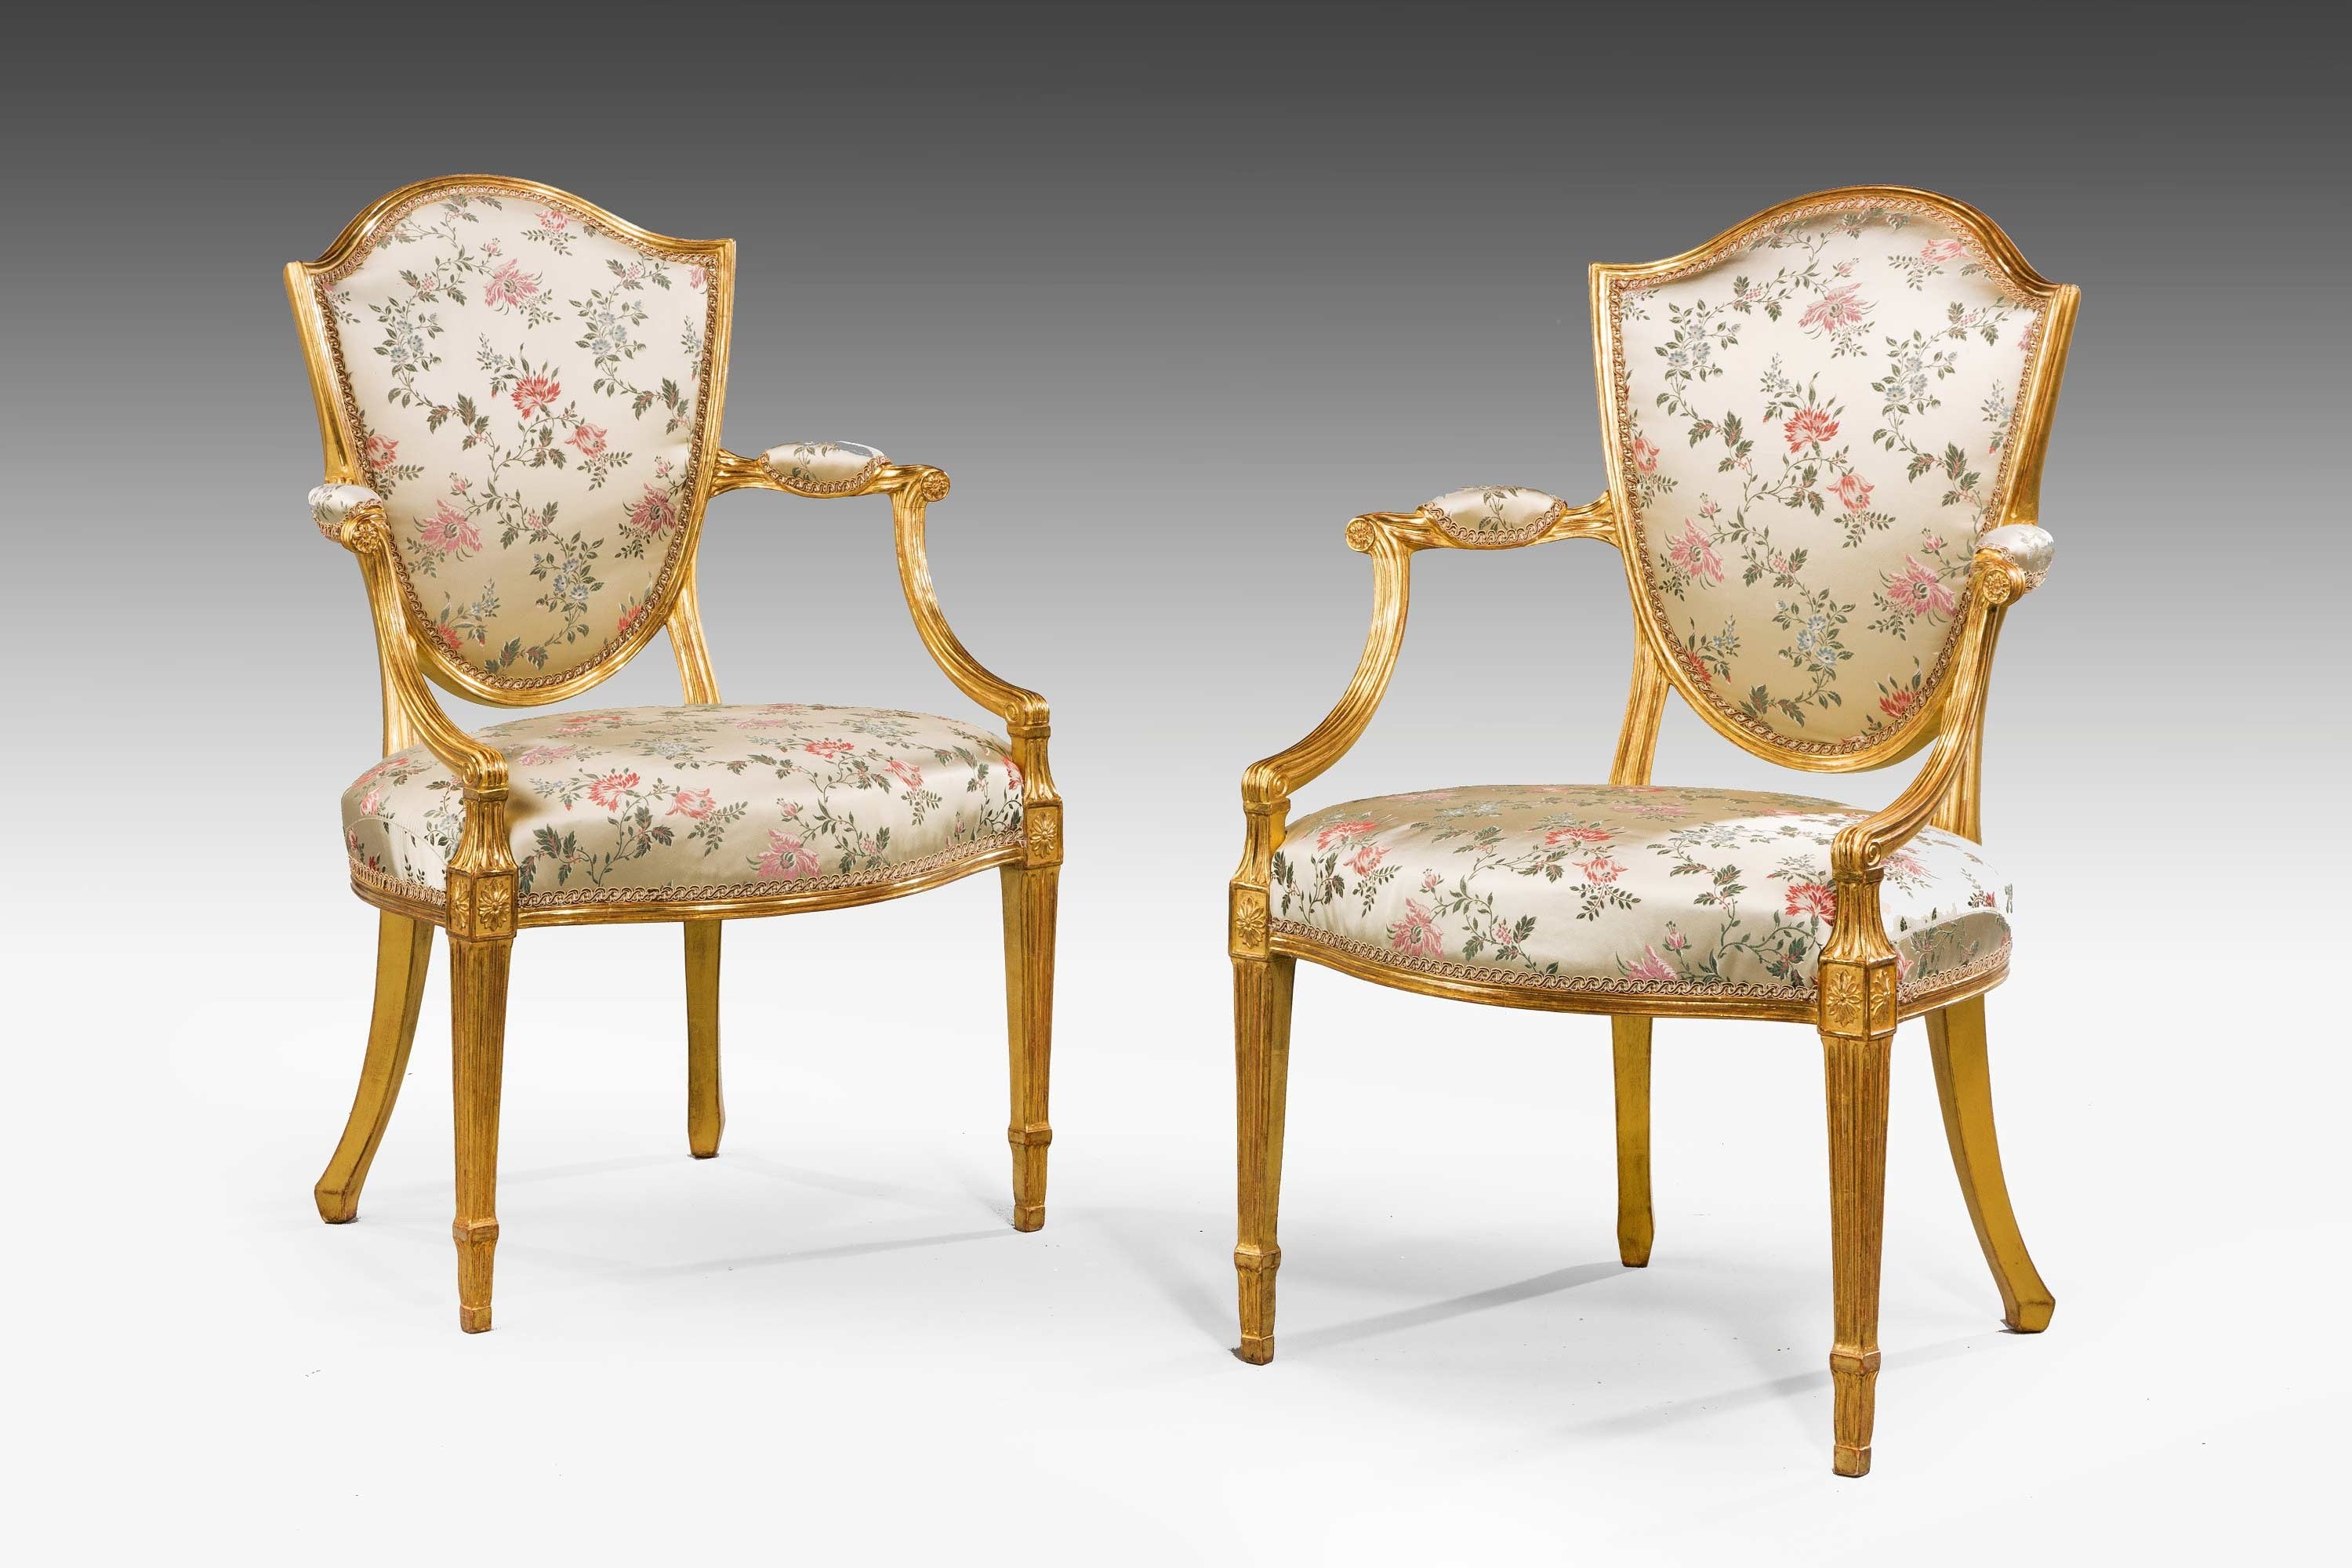 Pair of George III Period Giltwood Elbow Chairs